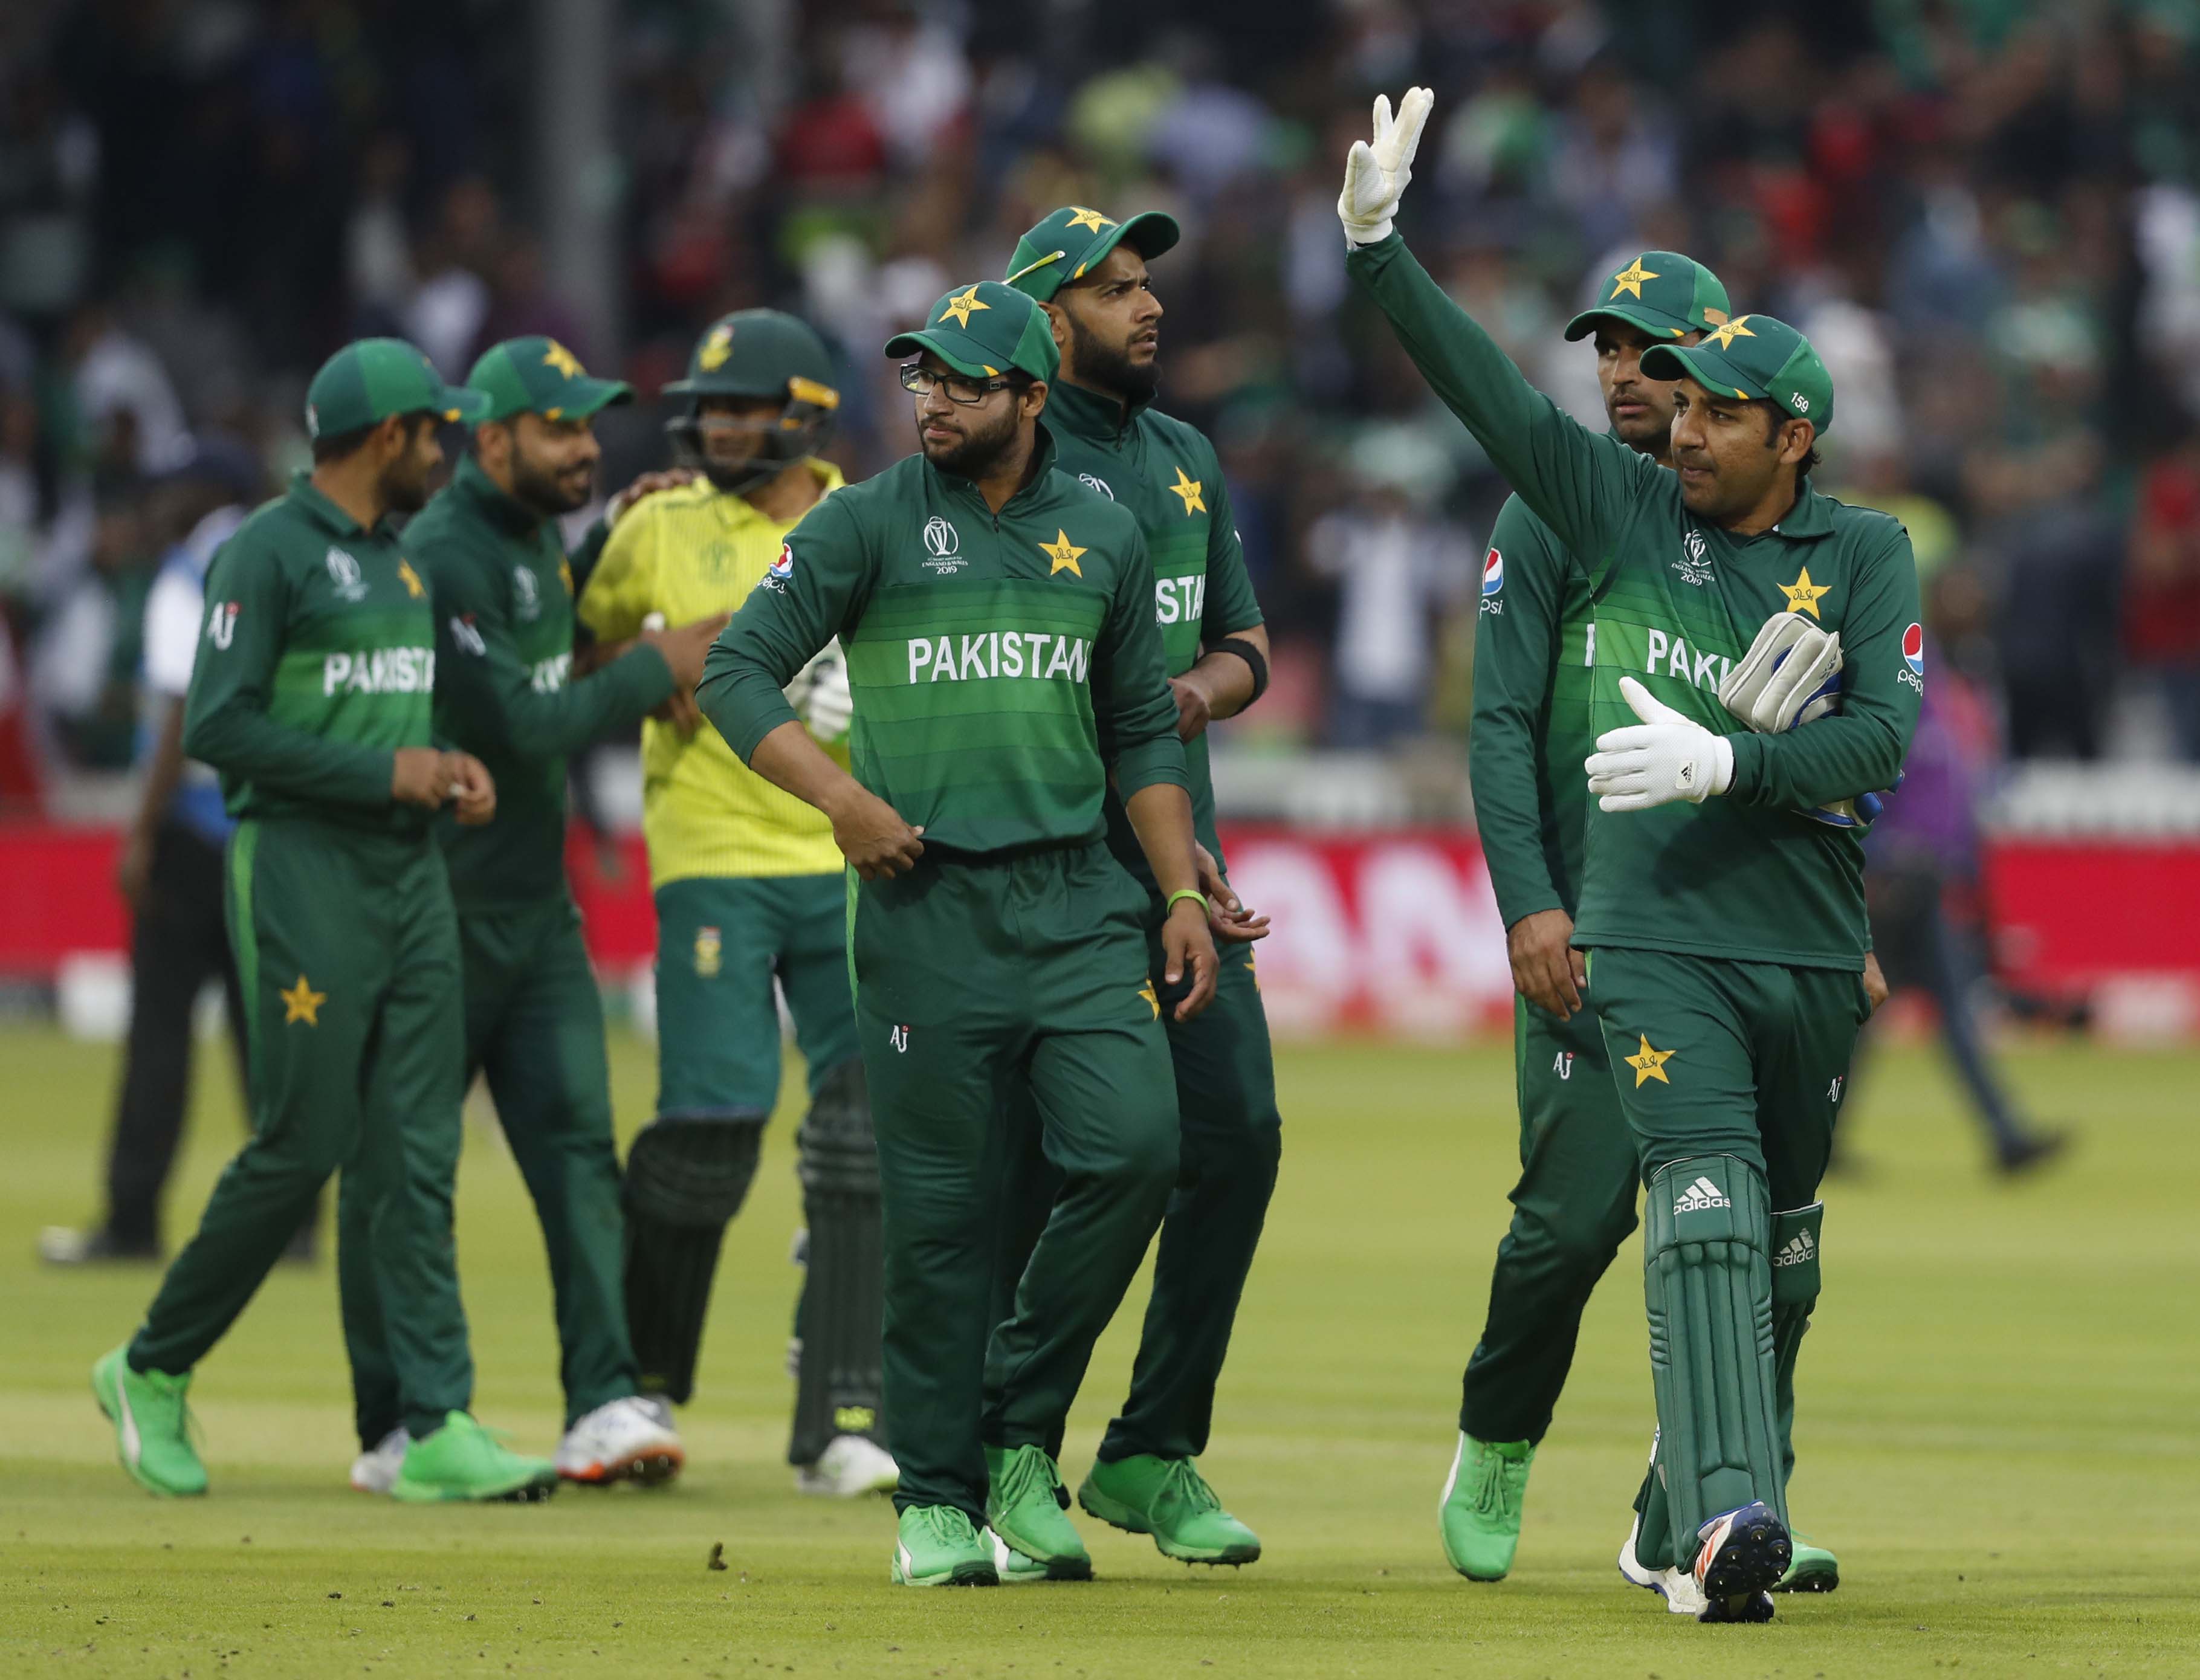 World Cup 2019: Another must-win for Pakistan against New Zealand